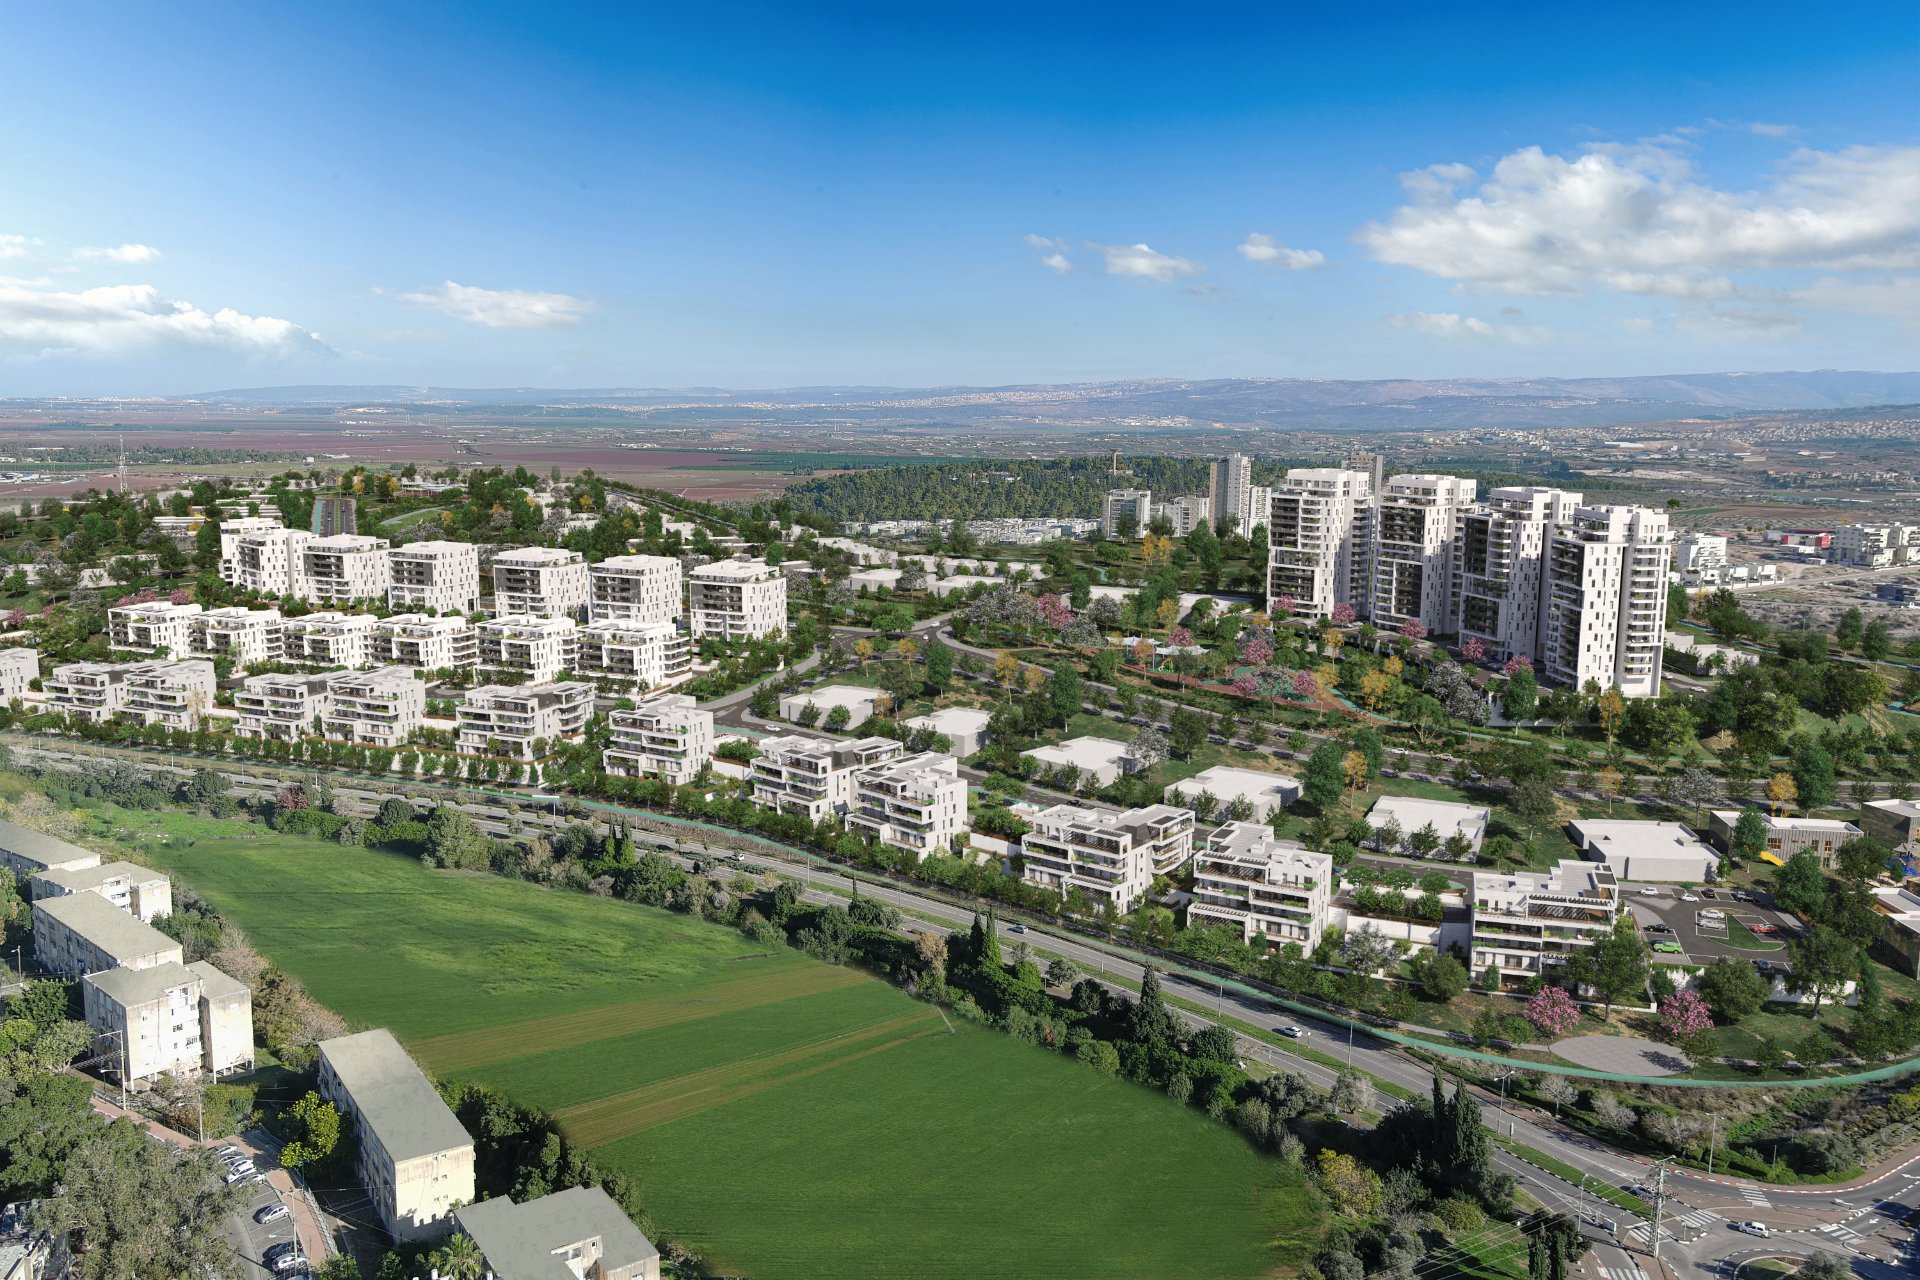 Photograph from the air of Kiryat Ata's project